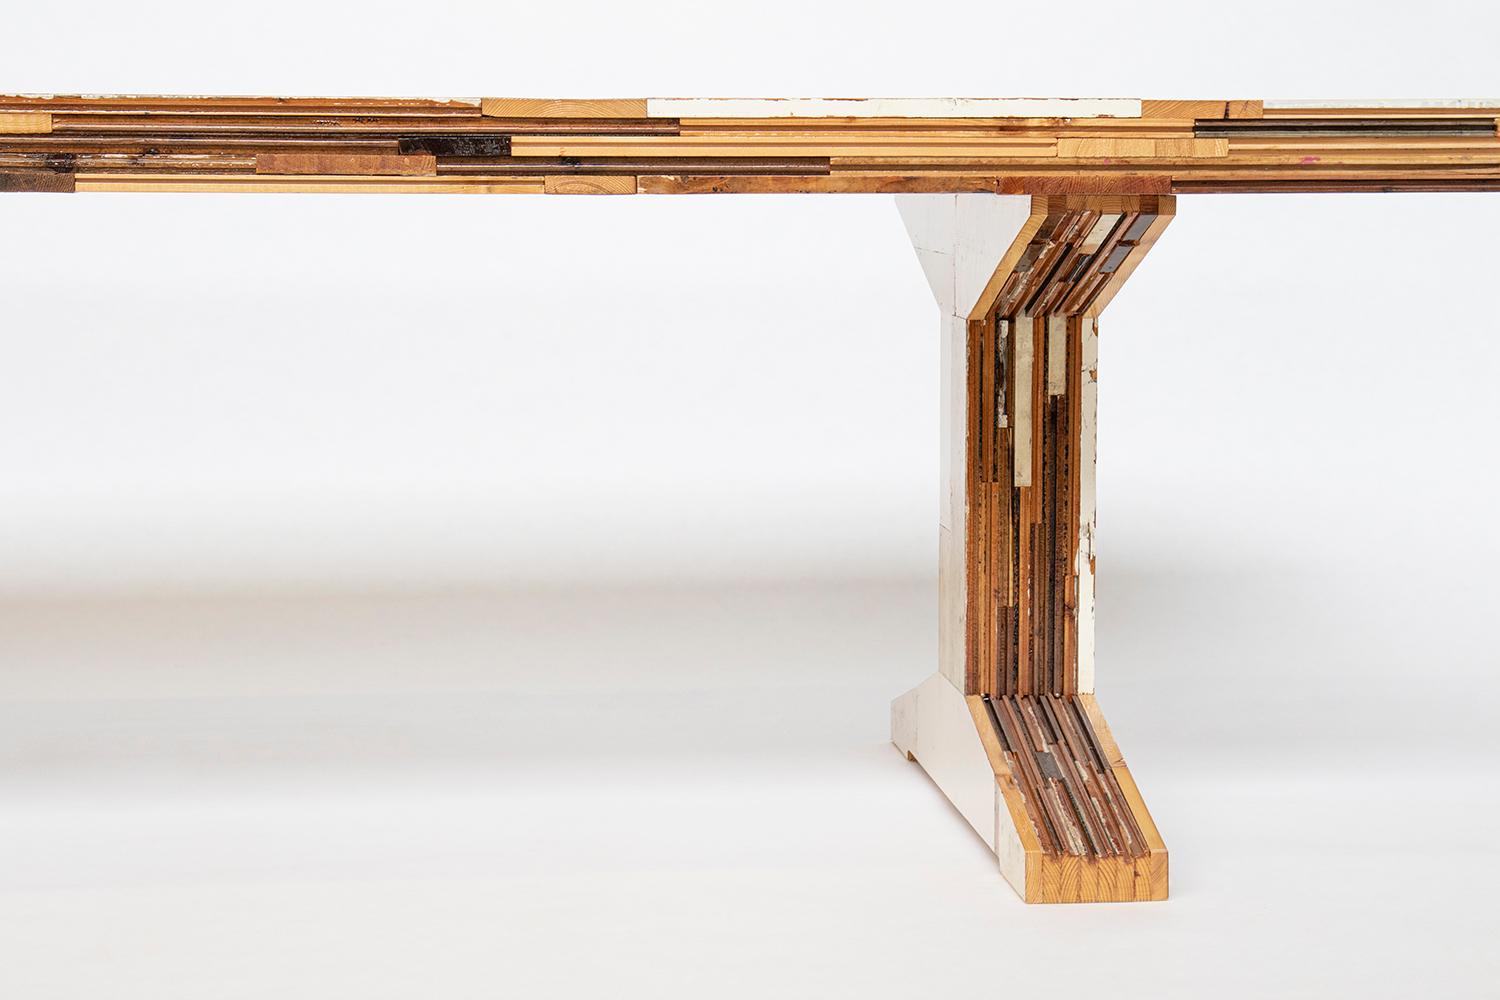 Contemporary Modern Wooden Dining Table, Waste Table in Scrapwood by Piet Hein Eek For Sale